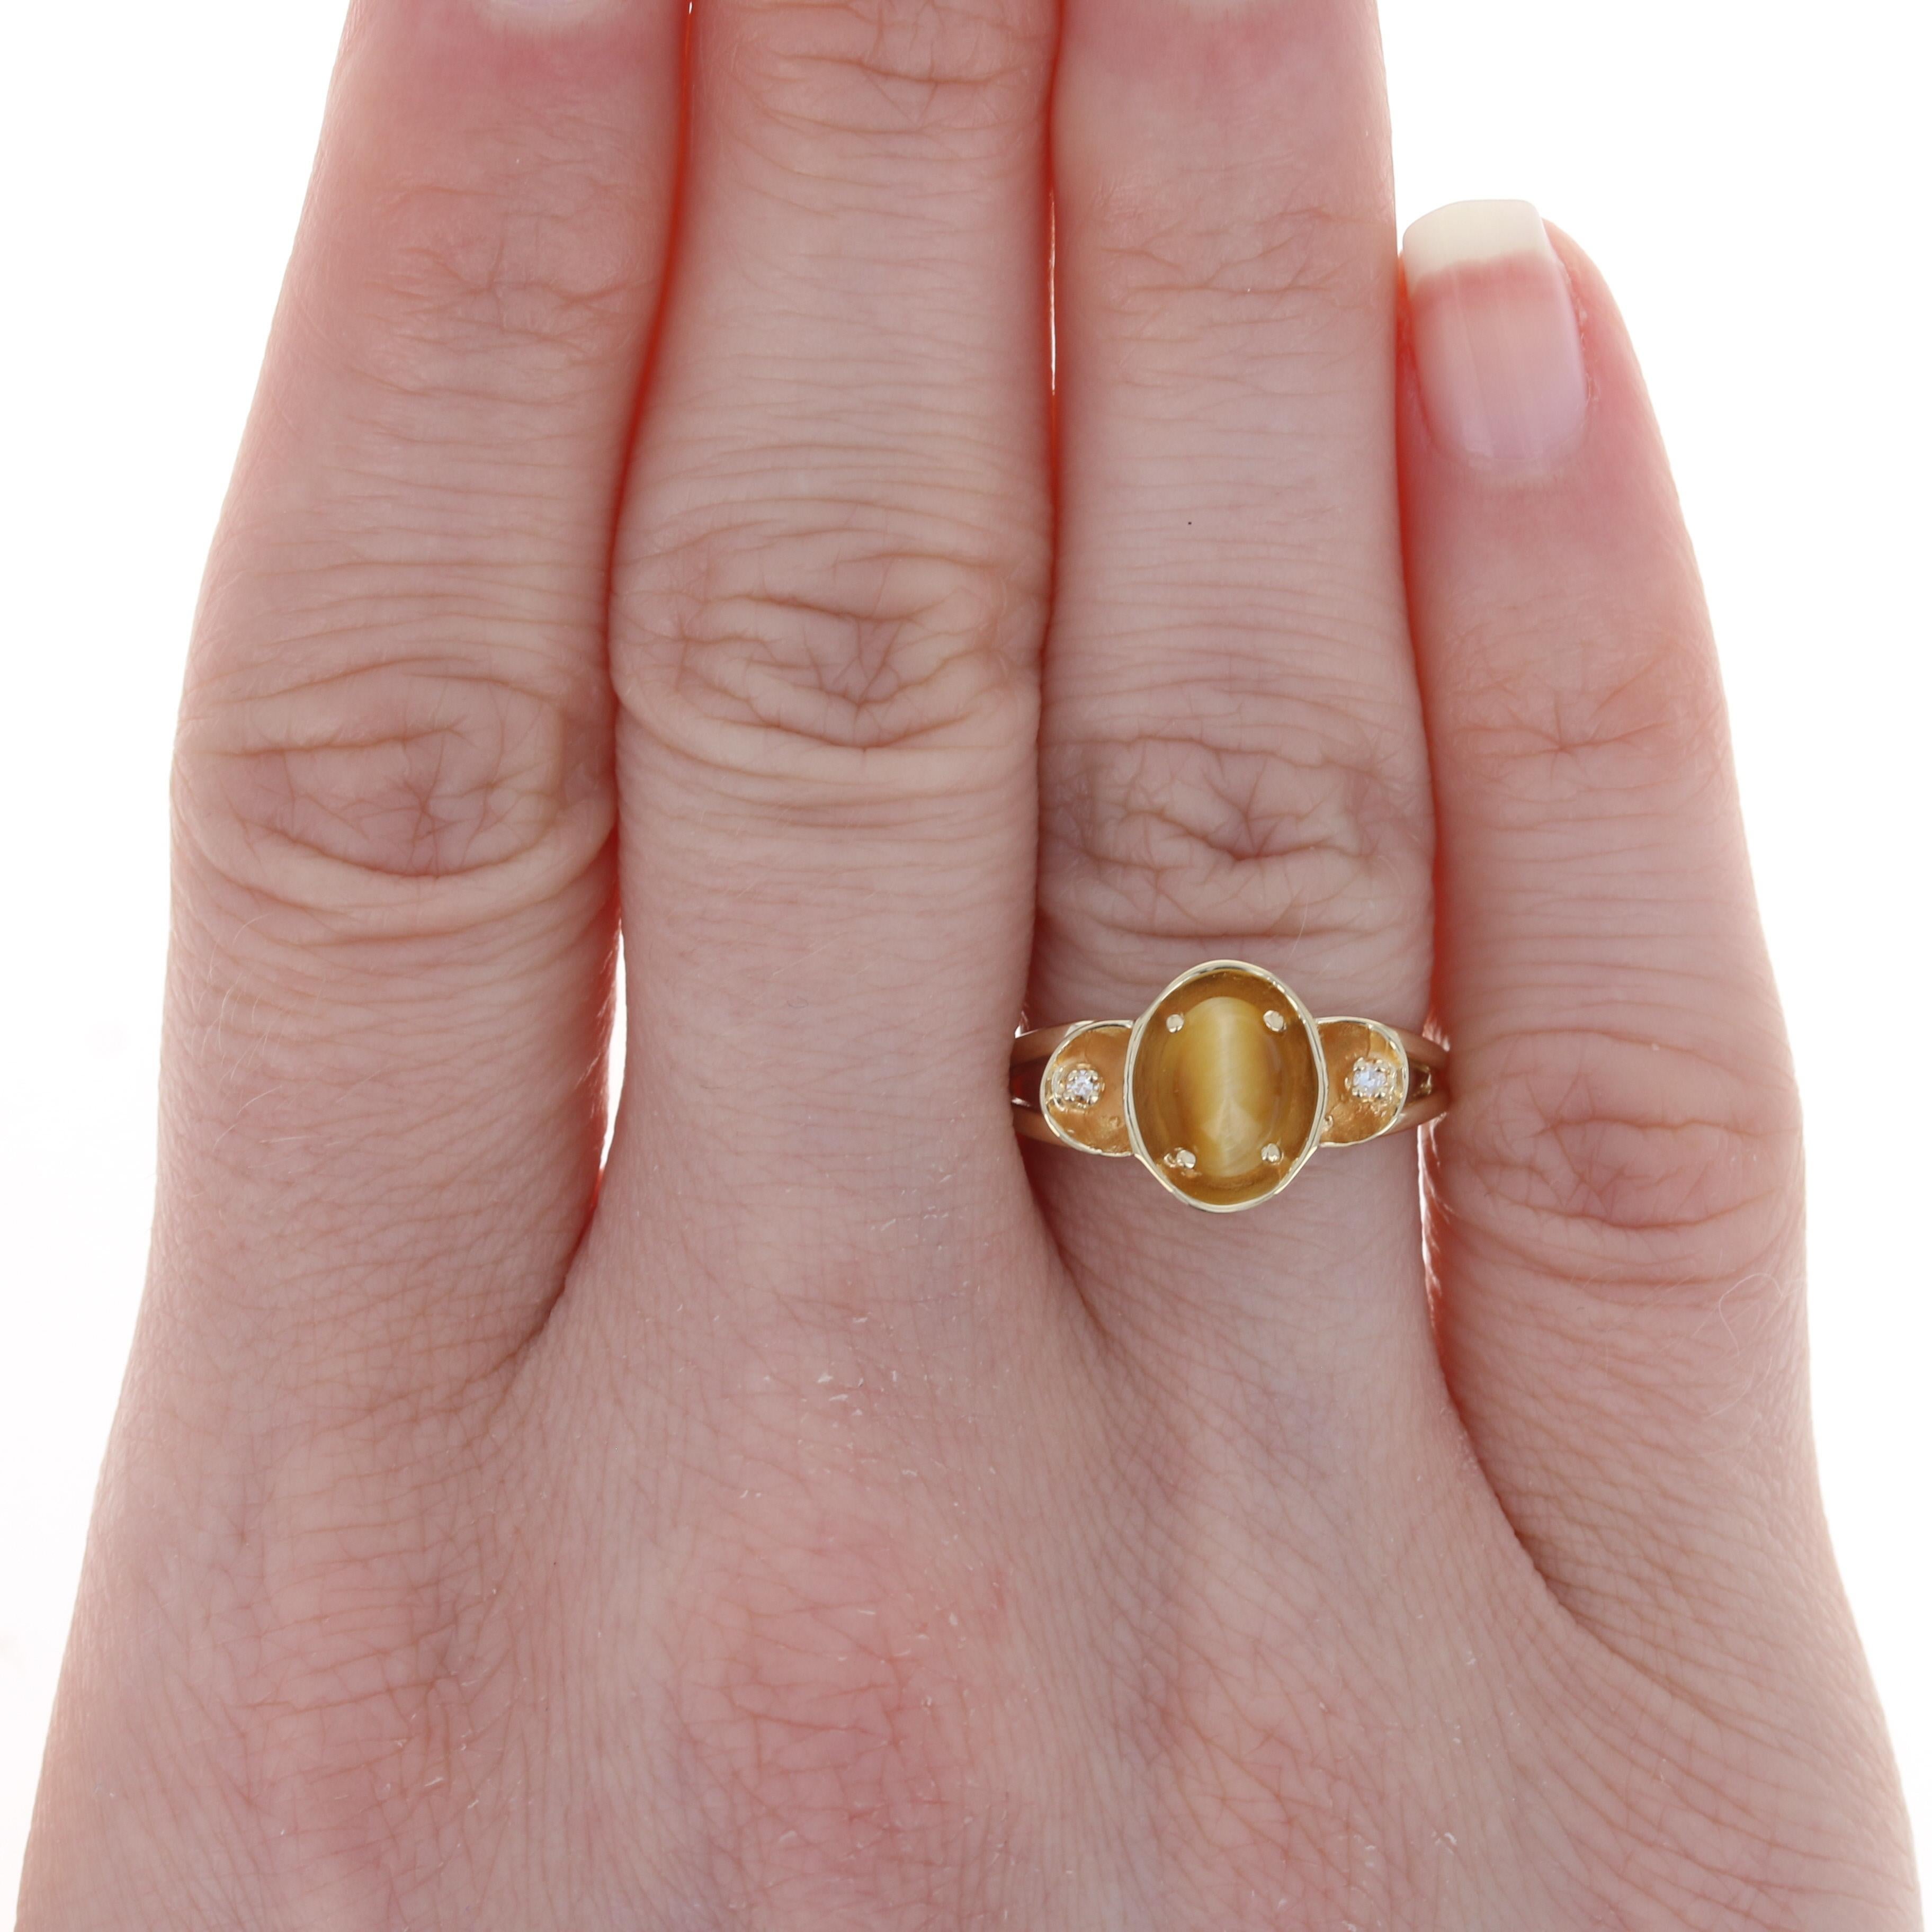 Size: 6 1/2
 Sizing Fee: Up 2 sizes for $25 or Down 2 sizes for $20 
 
 Metal Content: 14k Yellow Gold 
 
 Stone Information: 
 Genuine Tiger's Eye
 Cut: Oval Cabochon
 Size: 7.2mm x 5.3mm 
 
 Natural Diamonds
 Total Carats: .02ctw 
 Cut: Single
